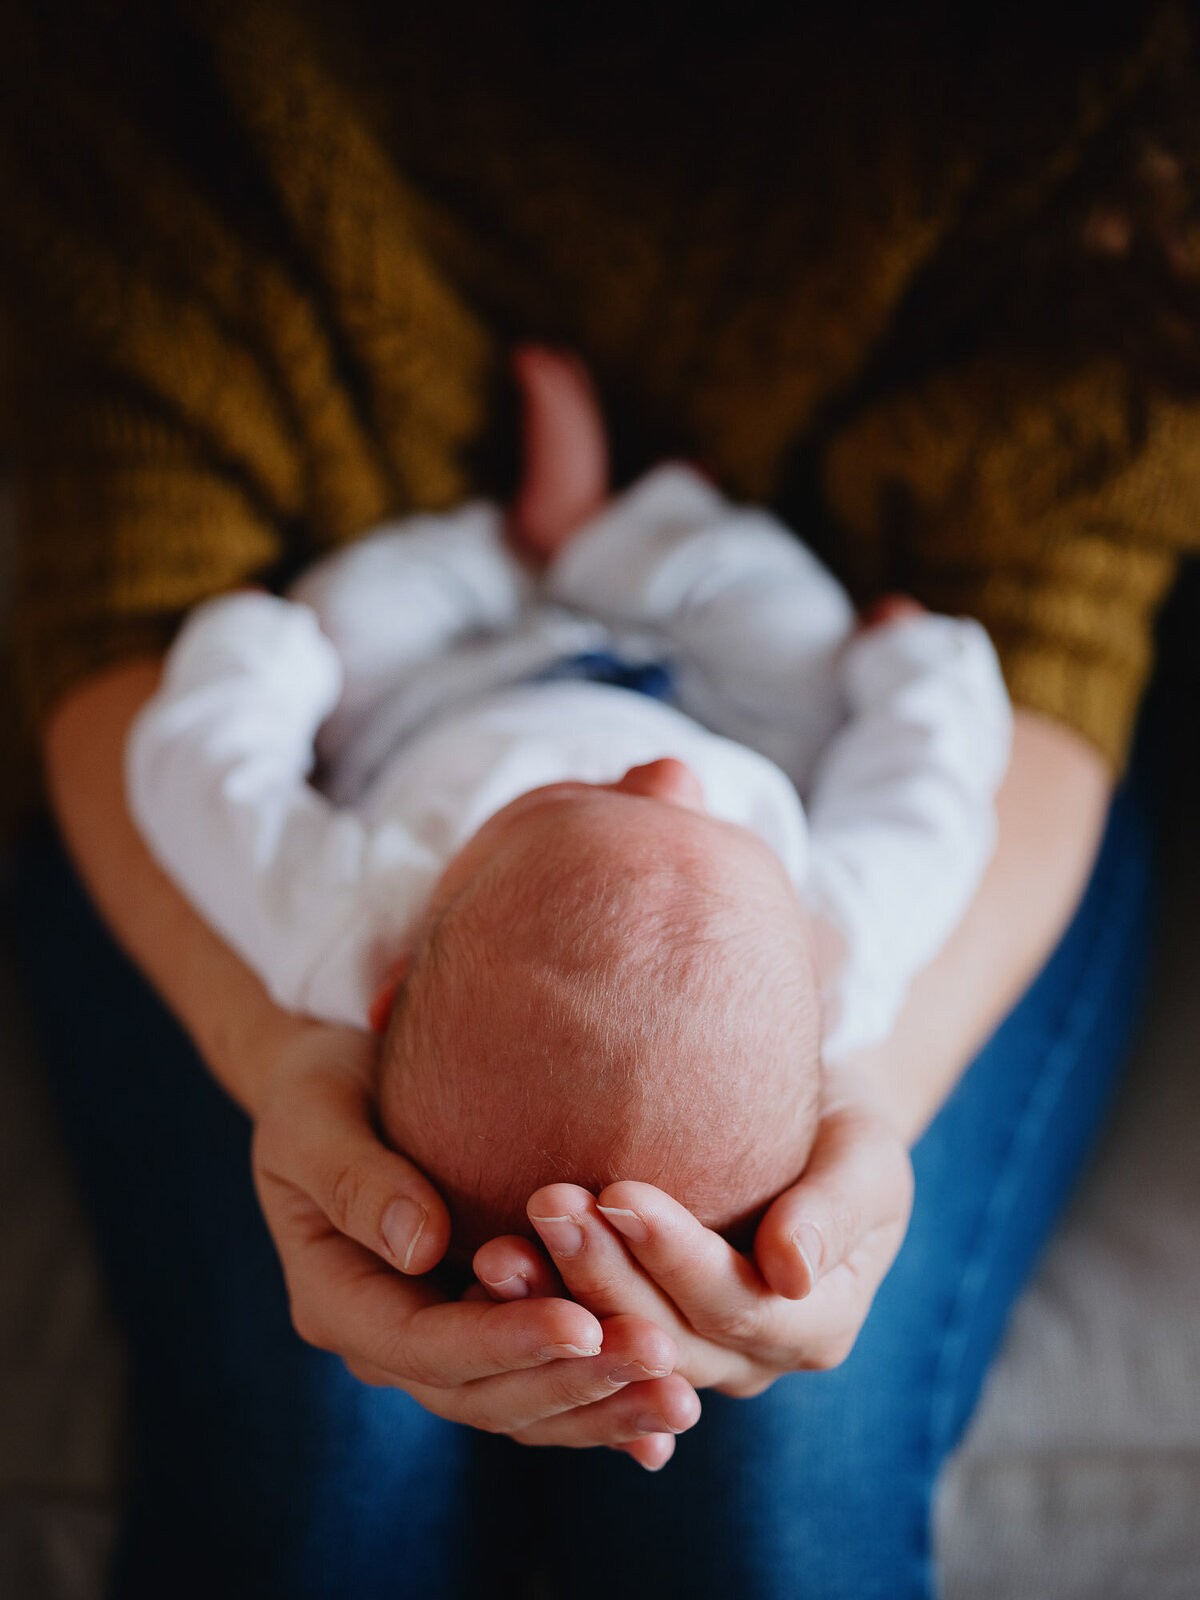 Cose-up of mom's hands cradling her newborn baby's head during an at home santa monica newborn photography session.